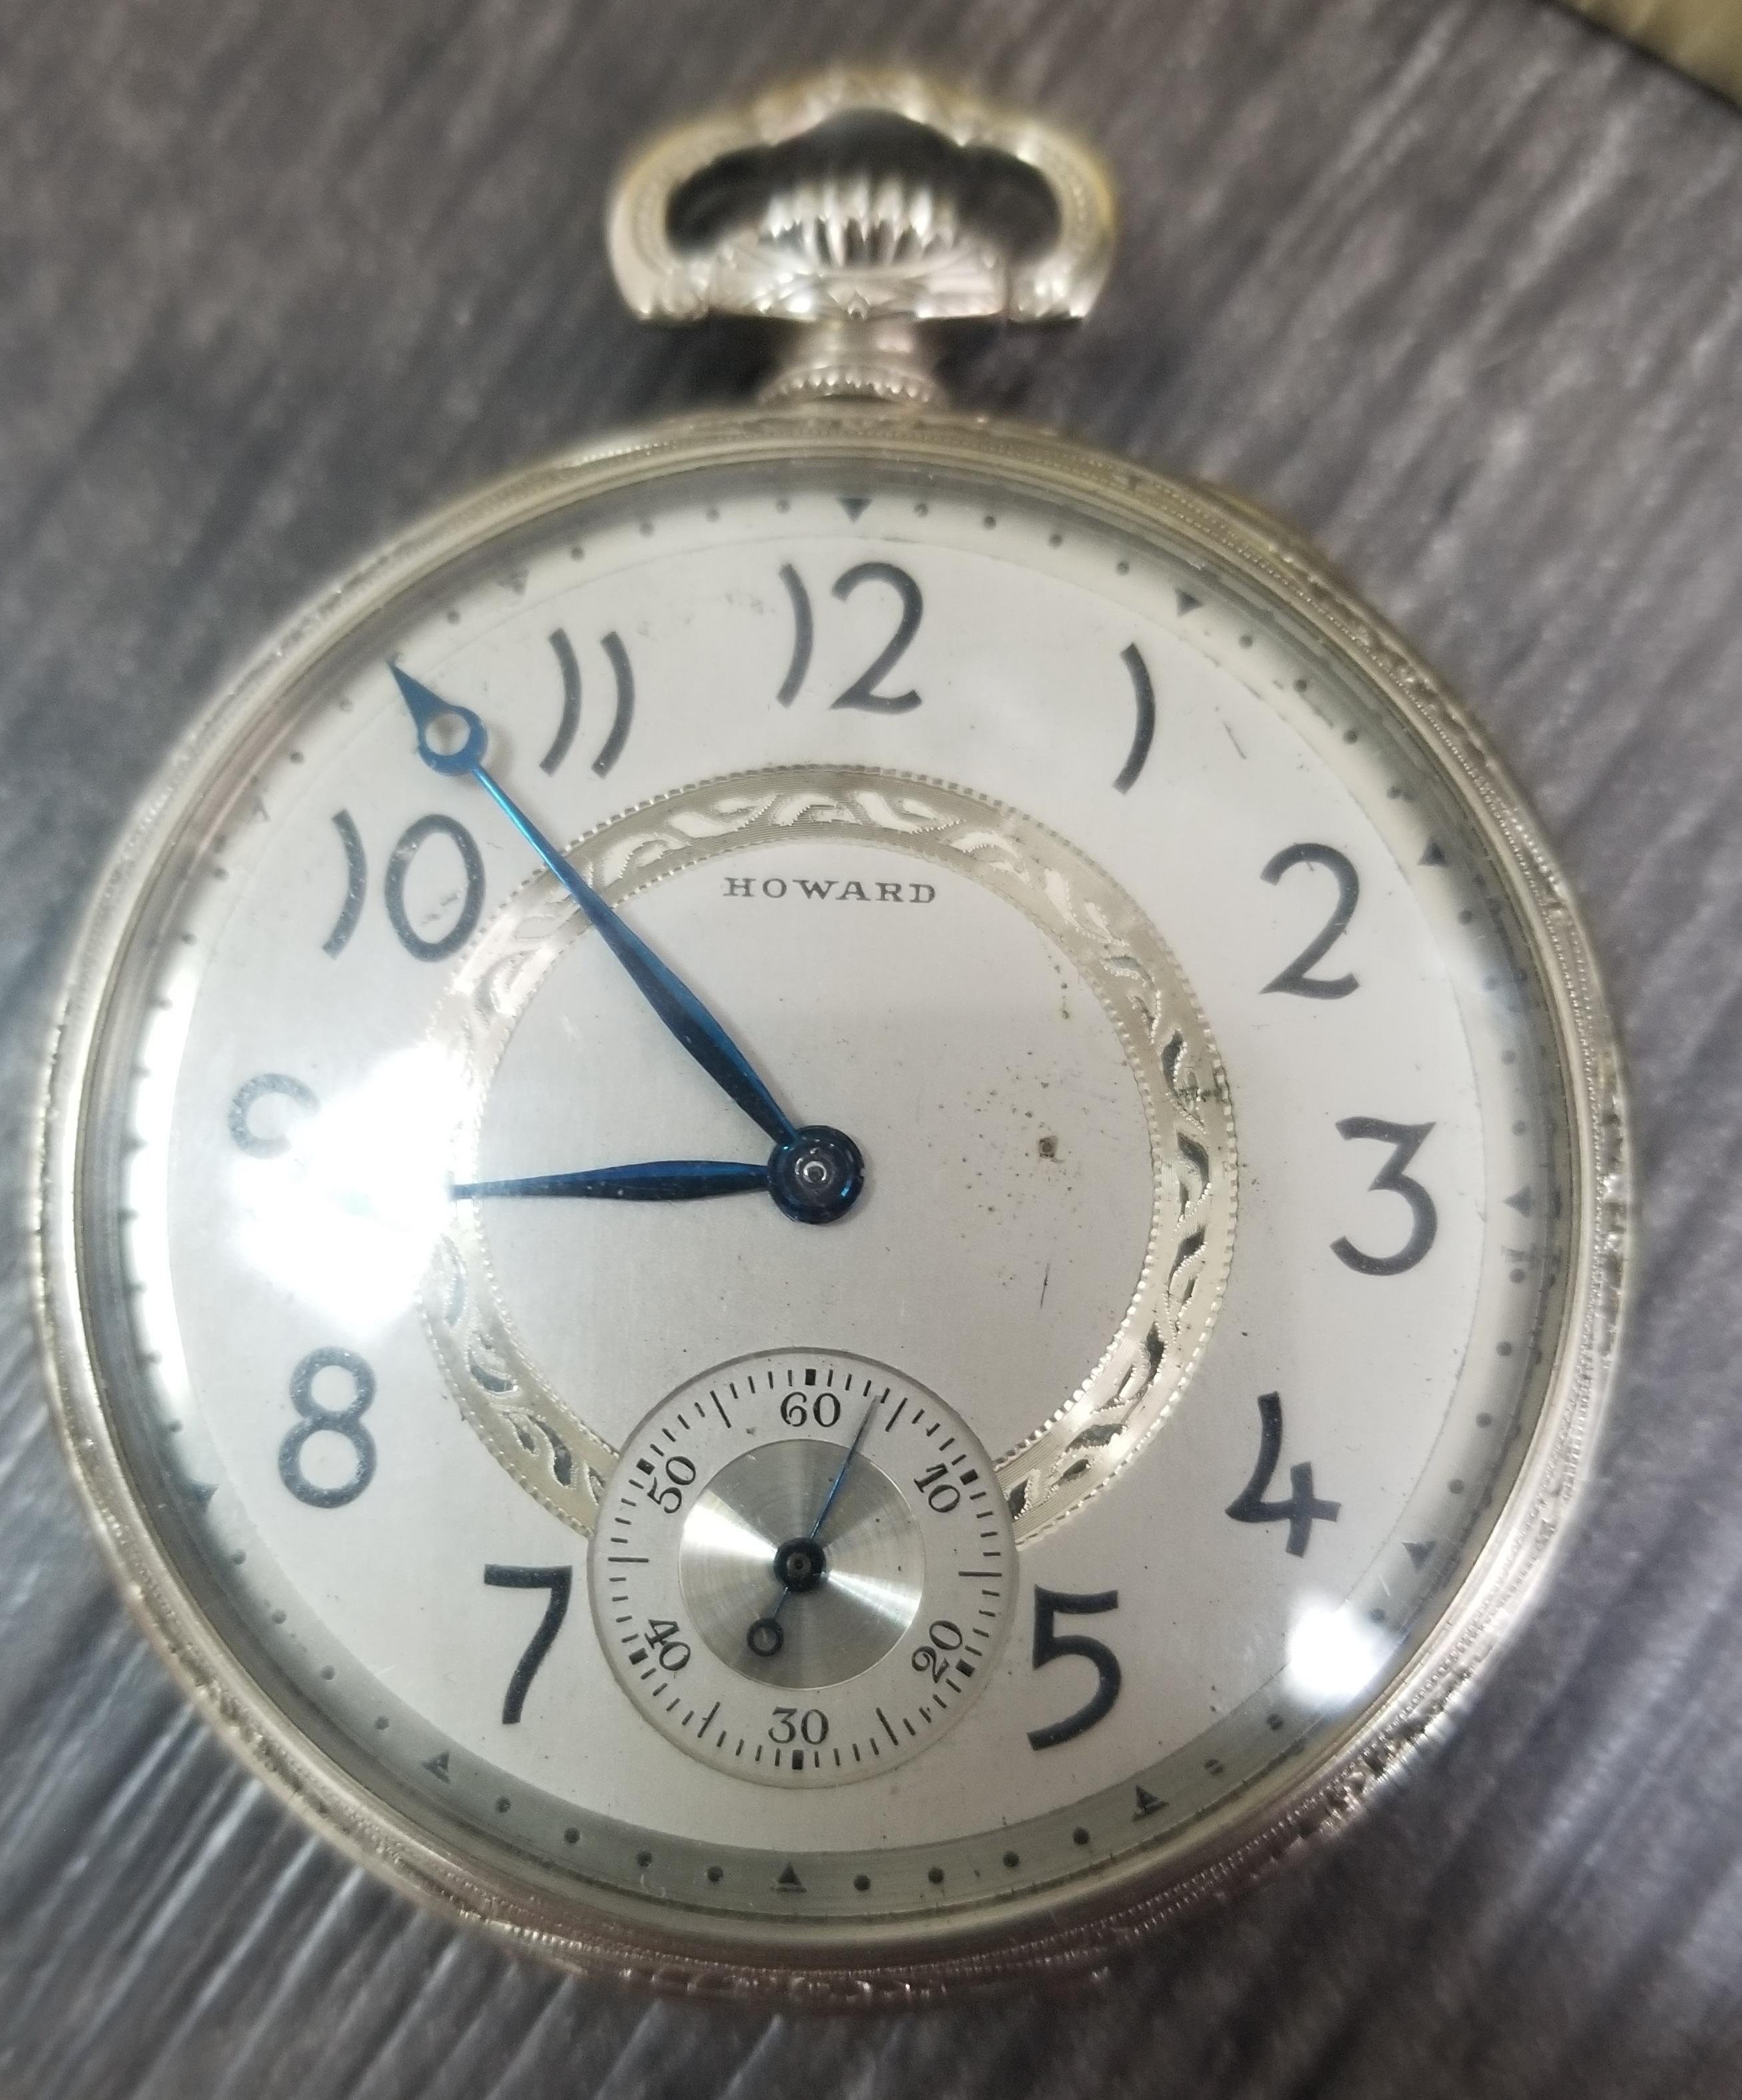 Mechanical hand winding - White Gold Plated
Brand: E. Howard Temperature Keystone Extra White Gold plated
Model: 	pocket watch 
Gender: 	Men
Period: 	1901-1949
Movement: 	Mechanical hand winding
Case material: 	White Gold Plated
Case   #